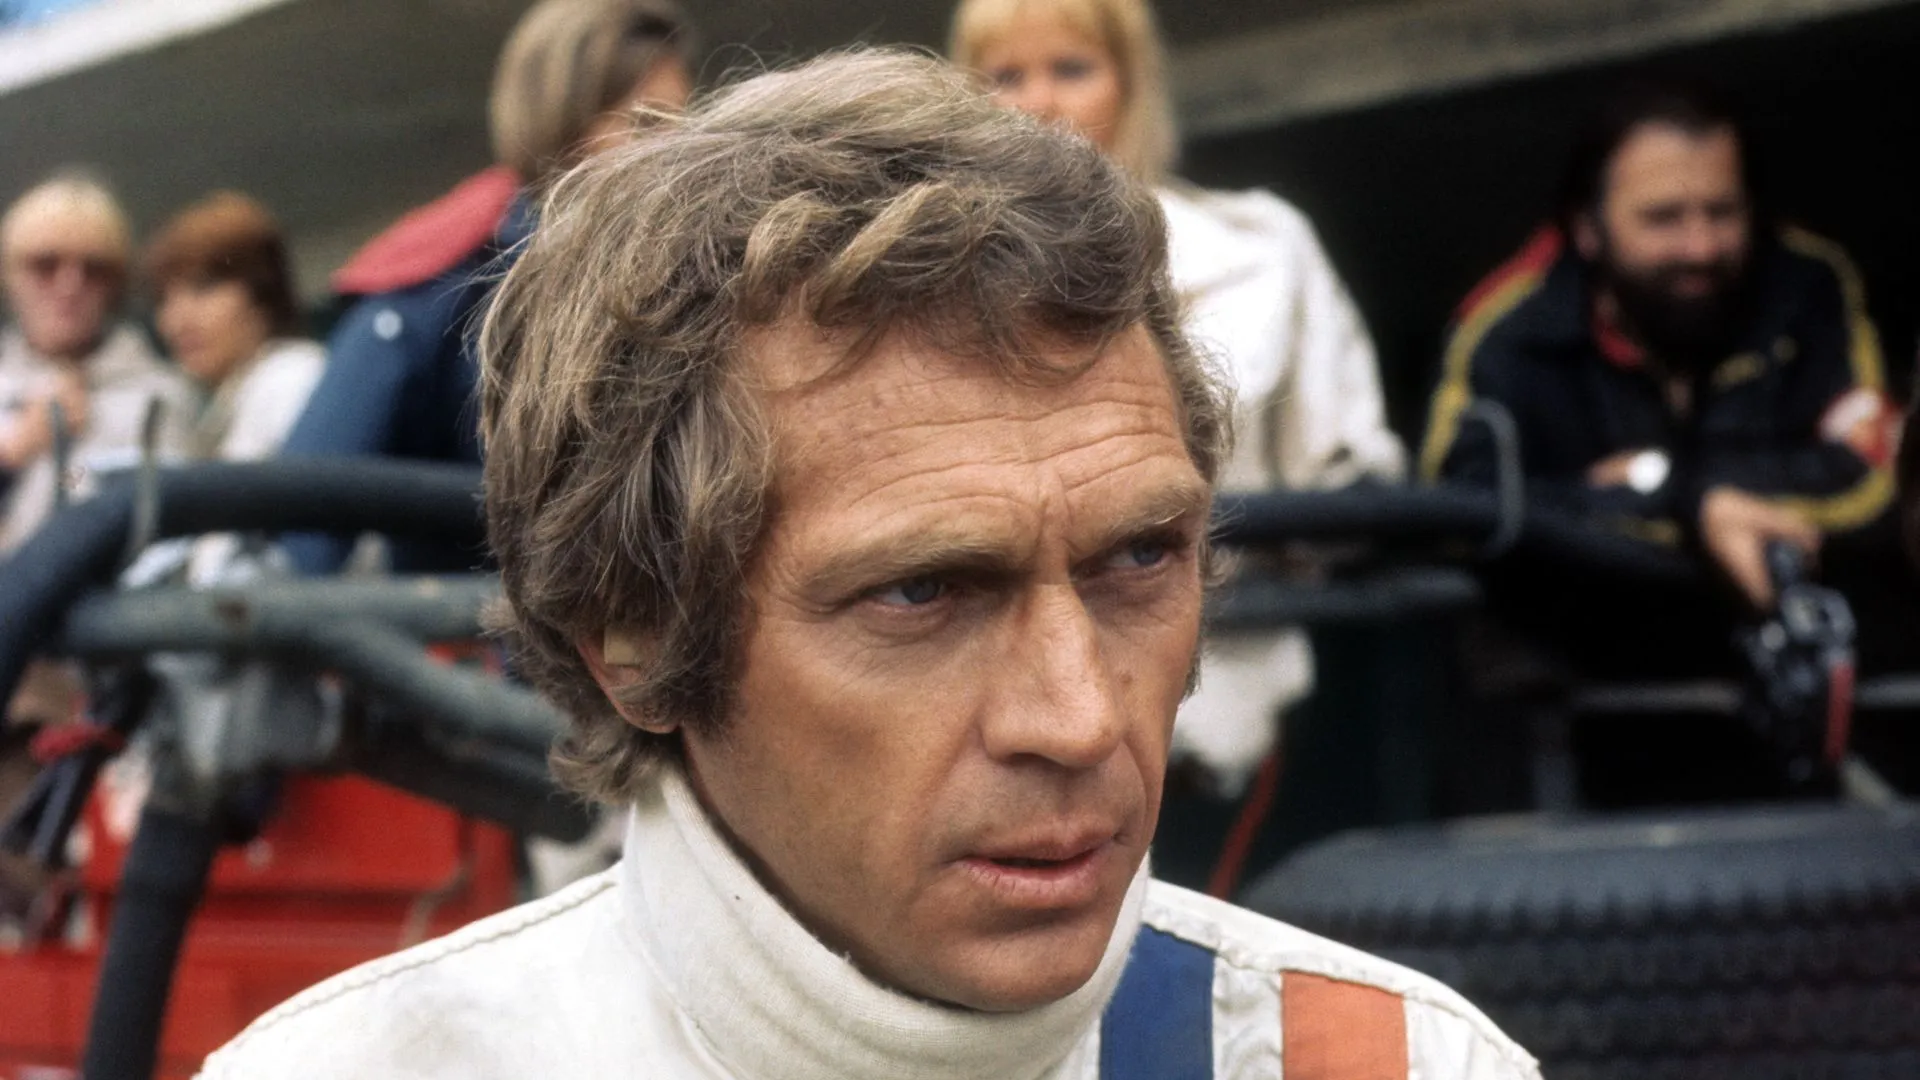 How Did Steve McQueen Die? All The Details About His Death